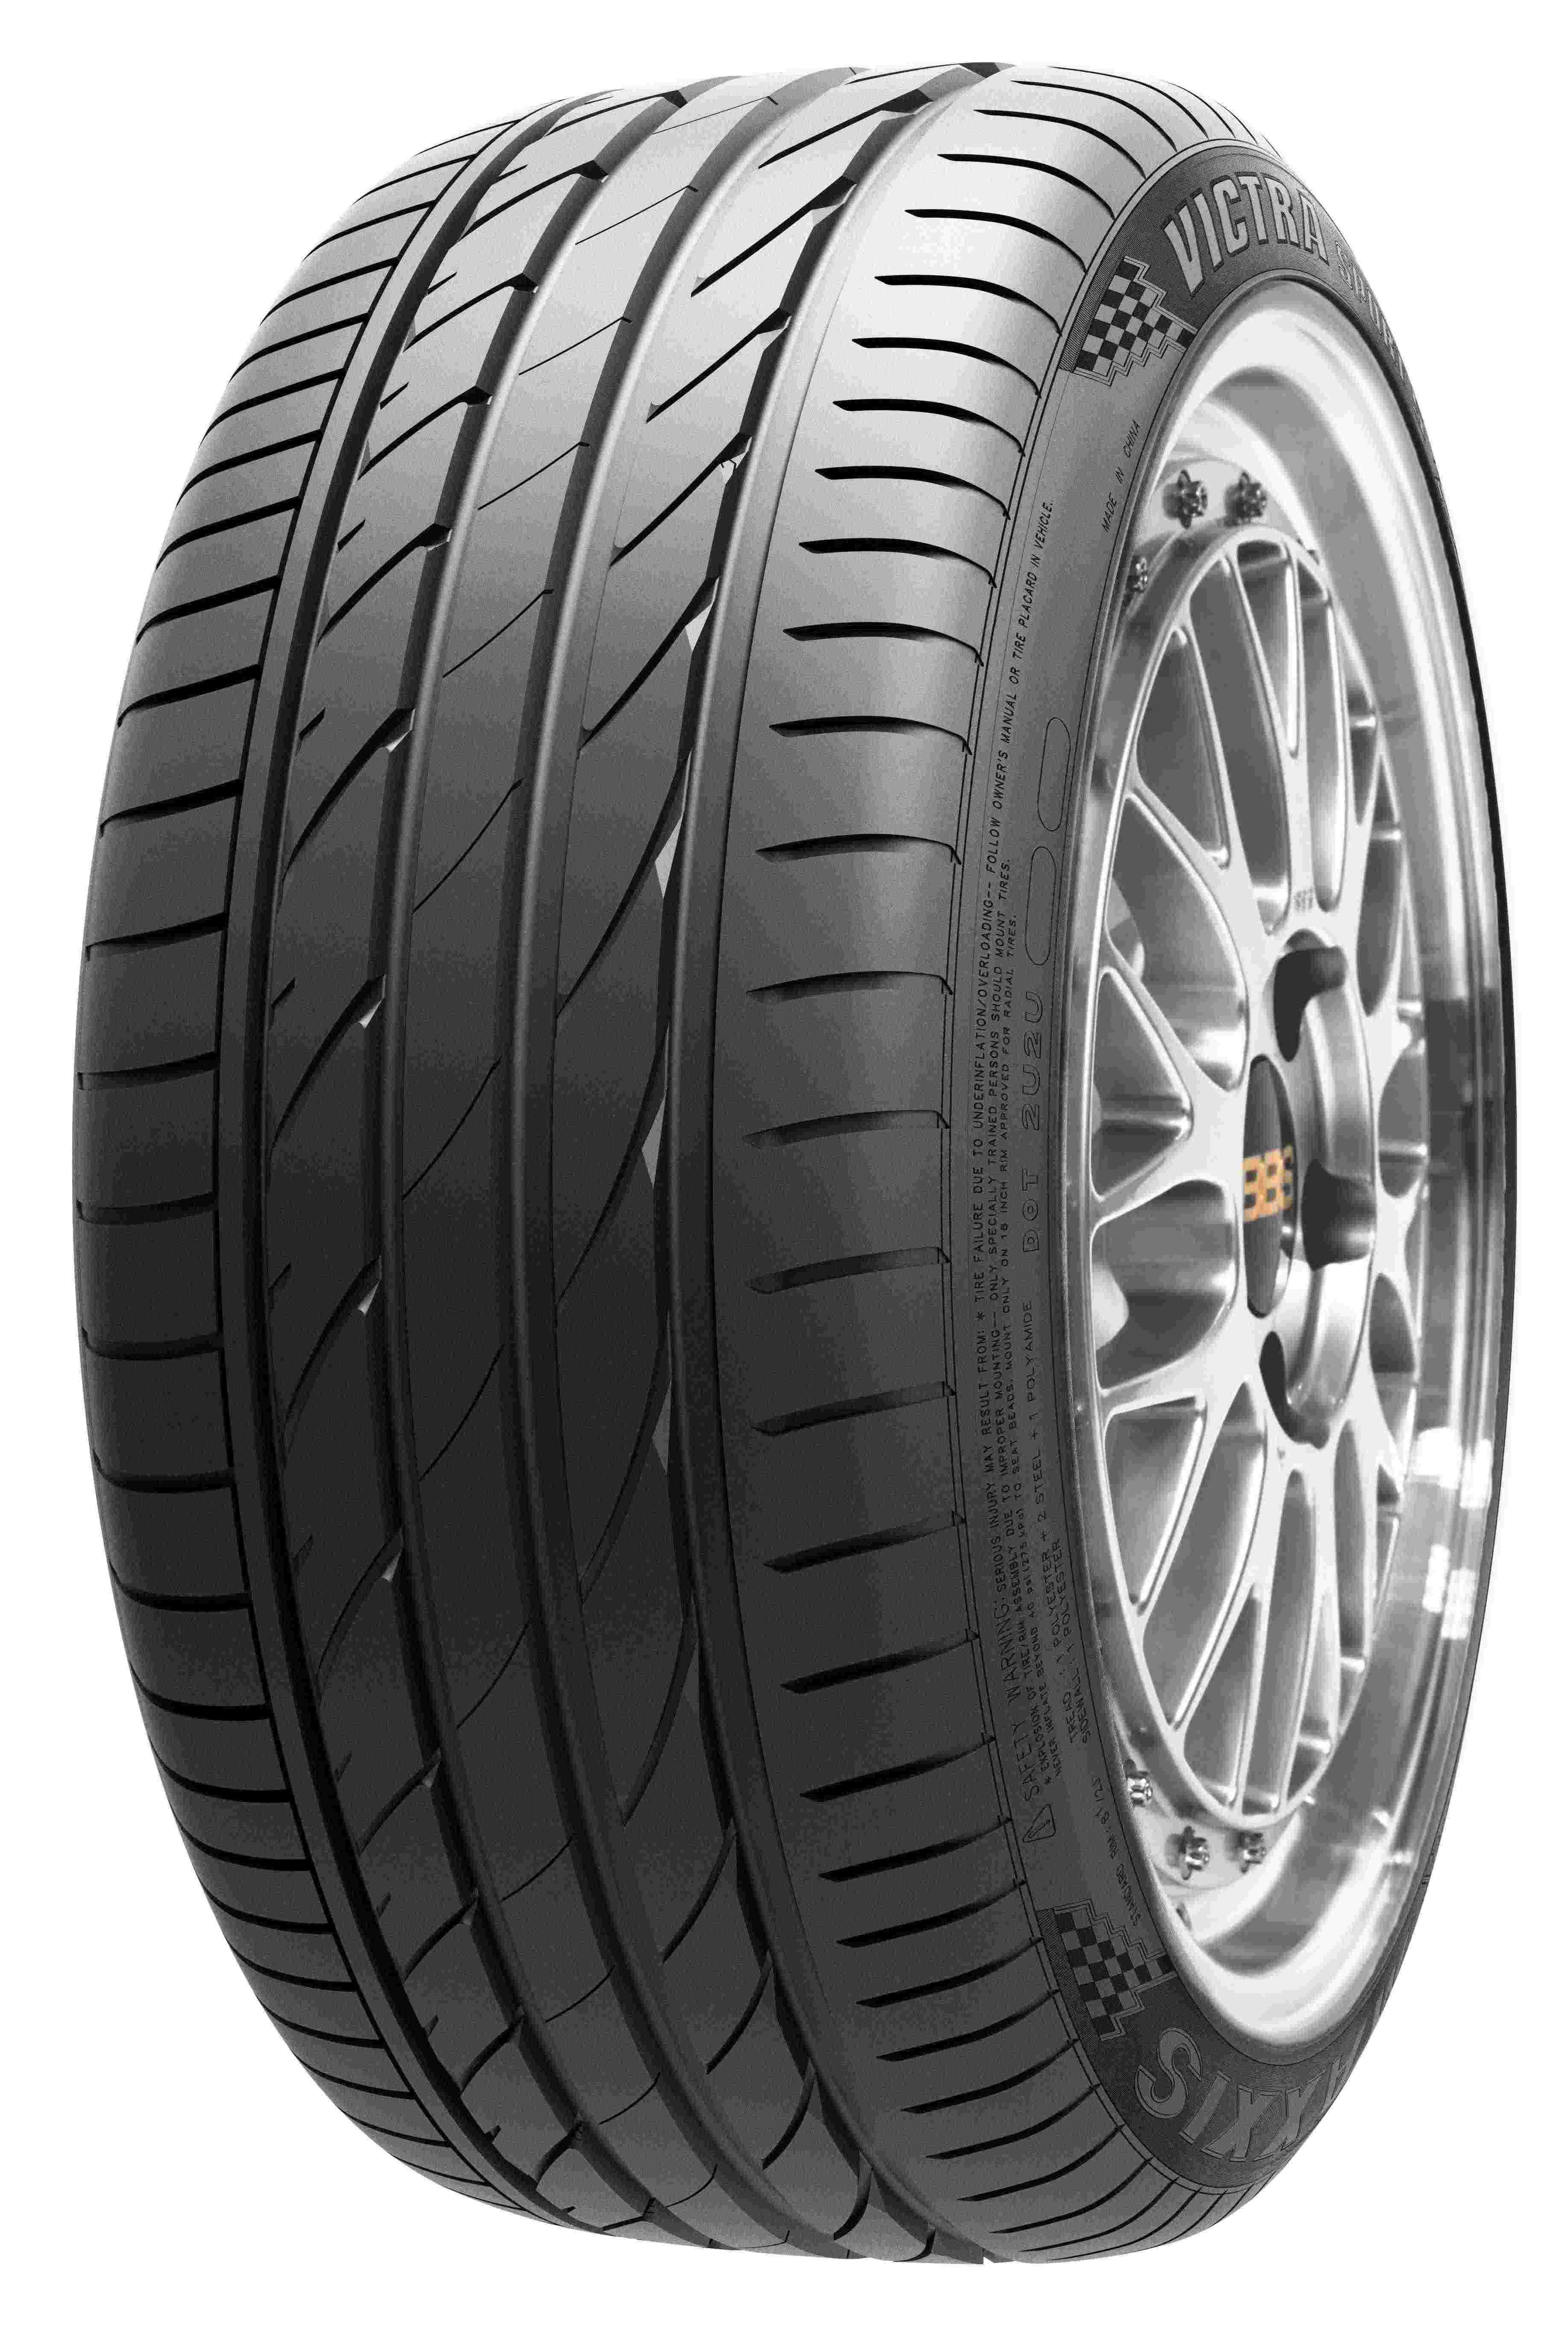 Maxxis victra sport 5 r19. Maxxis vs5 Victra. Maxxis Victra Sport 5. Maxxis vs5 Victra SUV. Maxxis Victra Sport 5 SUV.